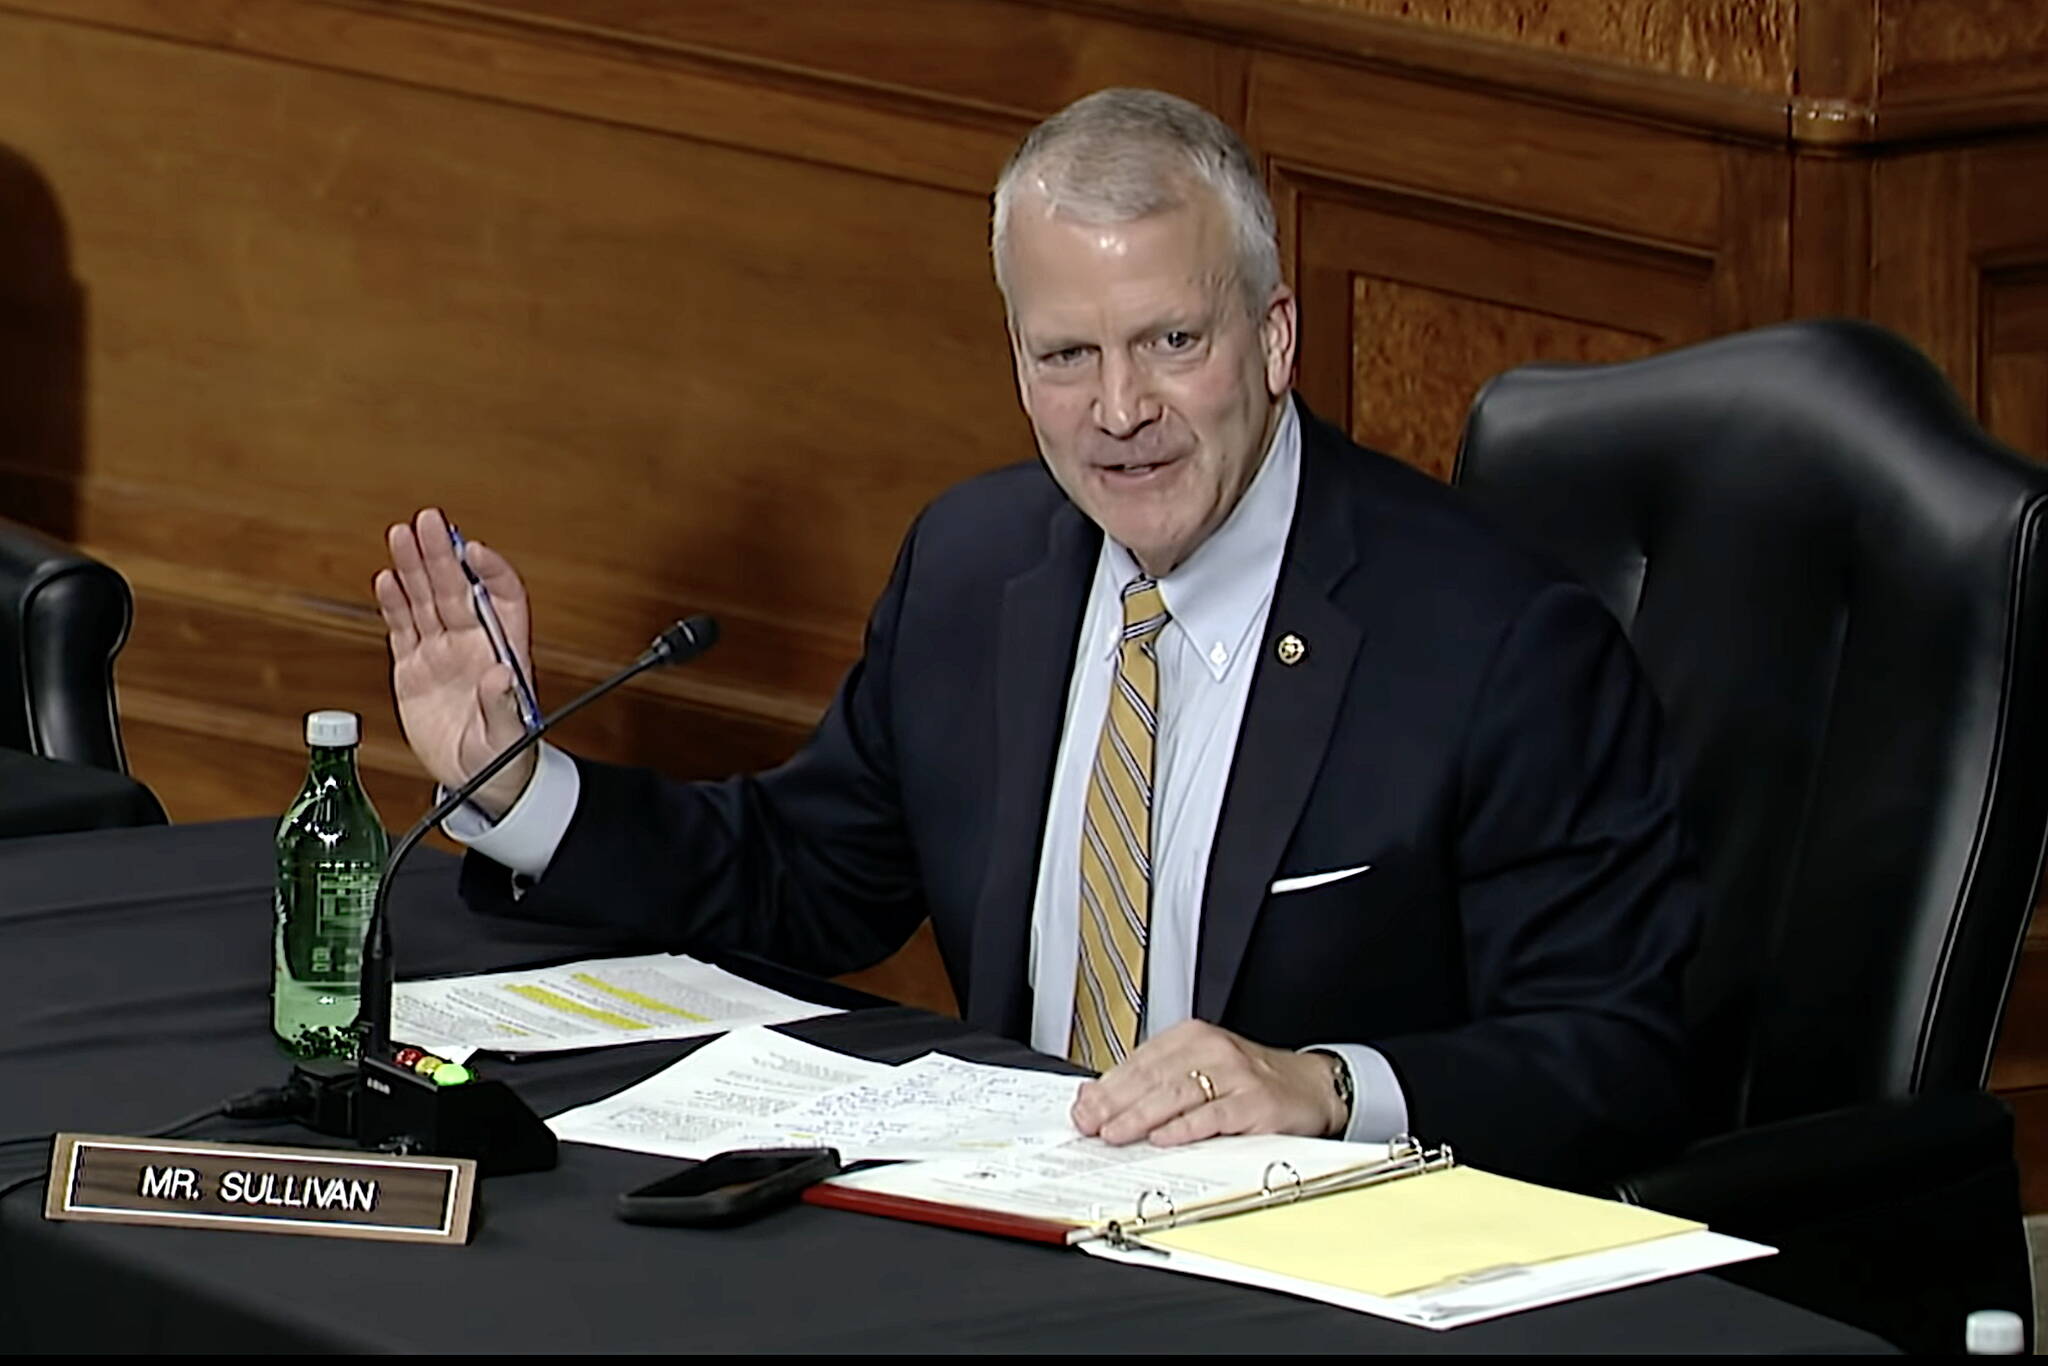 U.S. Sen. Dan Sullivan, an Alaska Republican, discusses oil and gas policy during an Armed Services Committee meeting at the U.S. Capitol in May. (Screenshot from official U.S. Senate video)